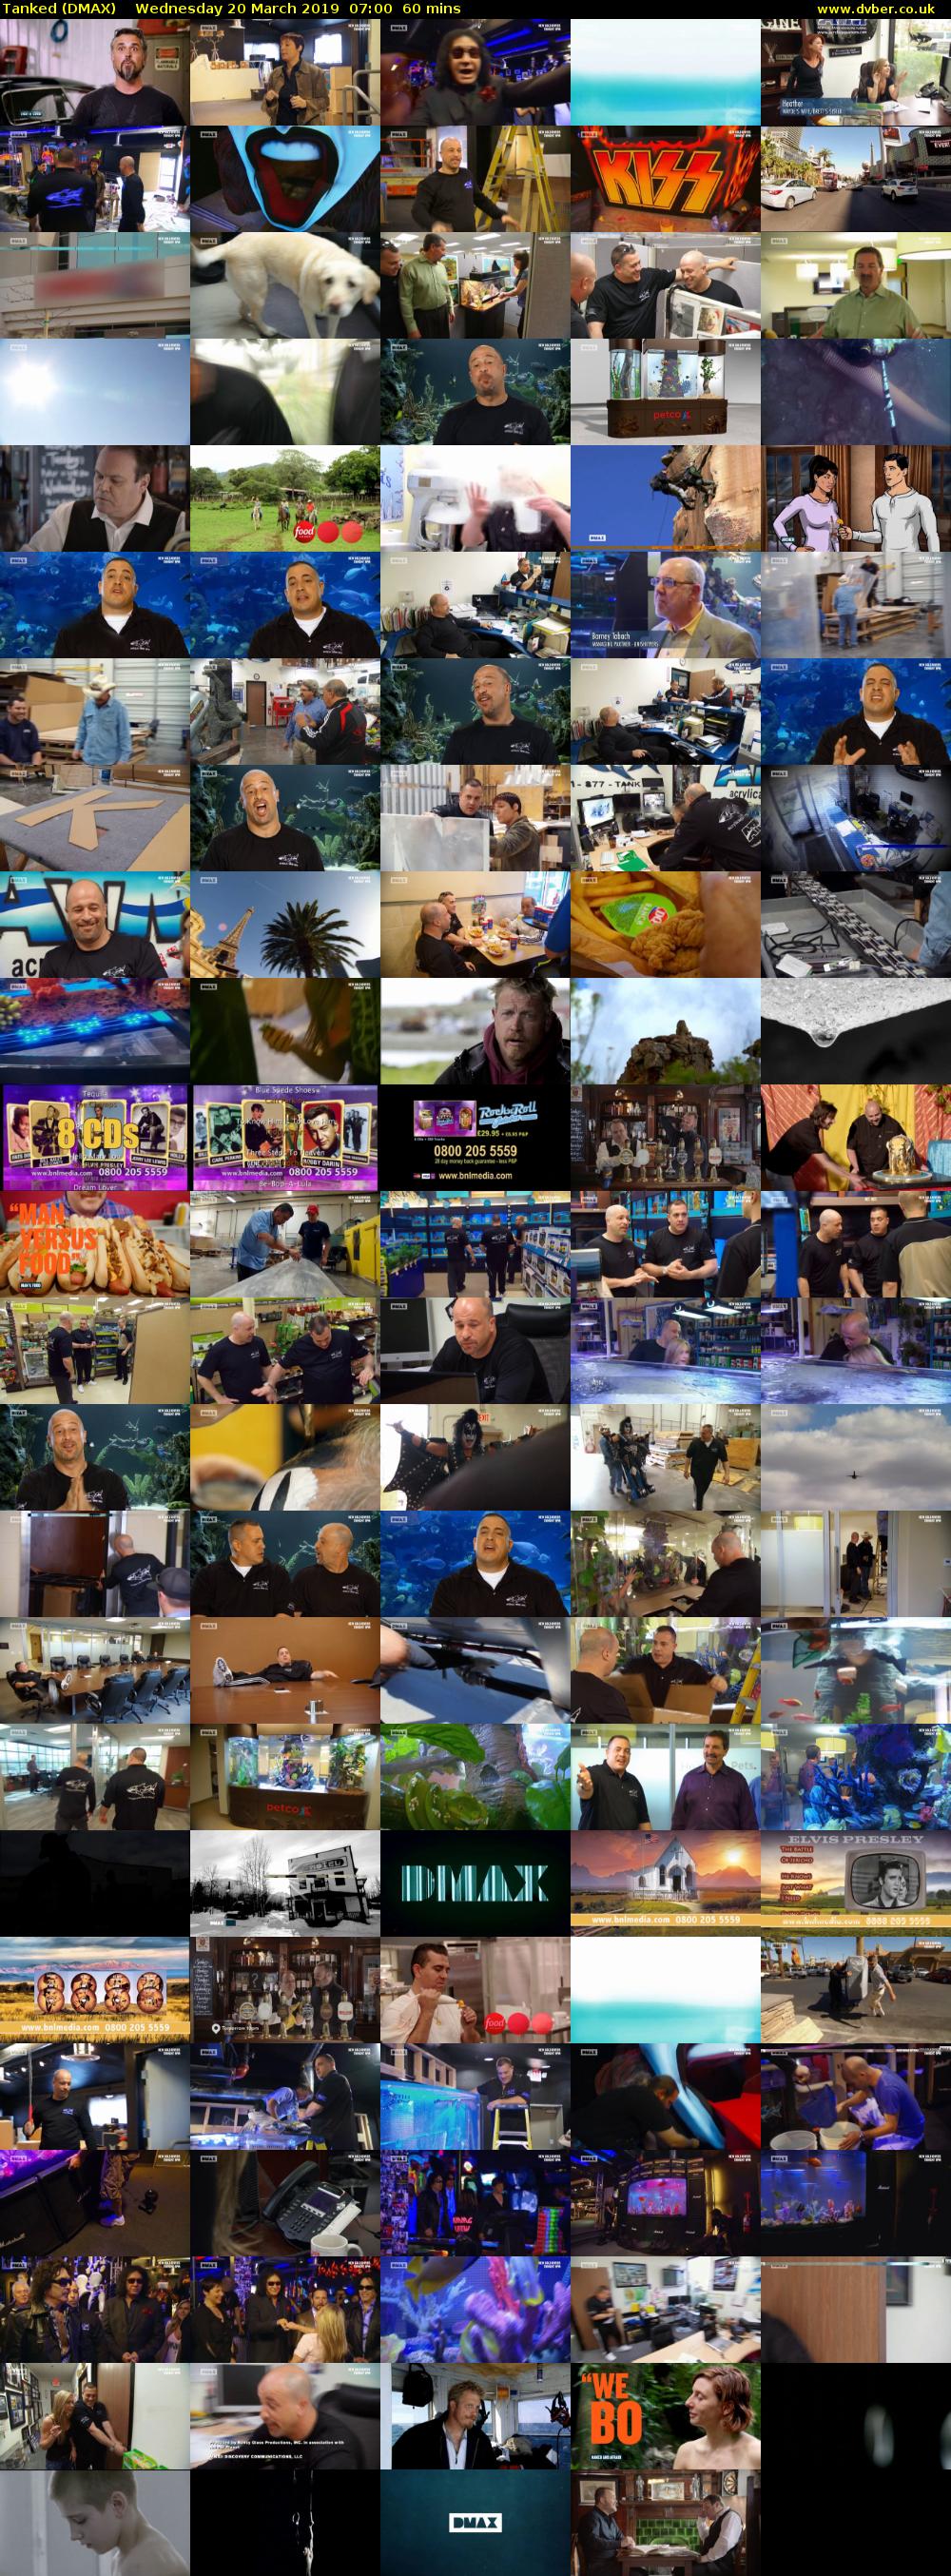 Tanked (DMAX) Wednesday 20 March 2019 07:00 - 08:00